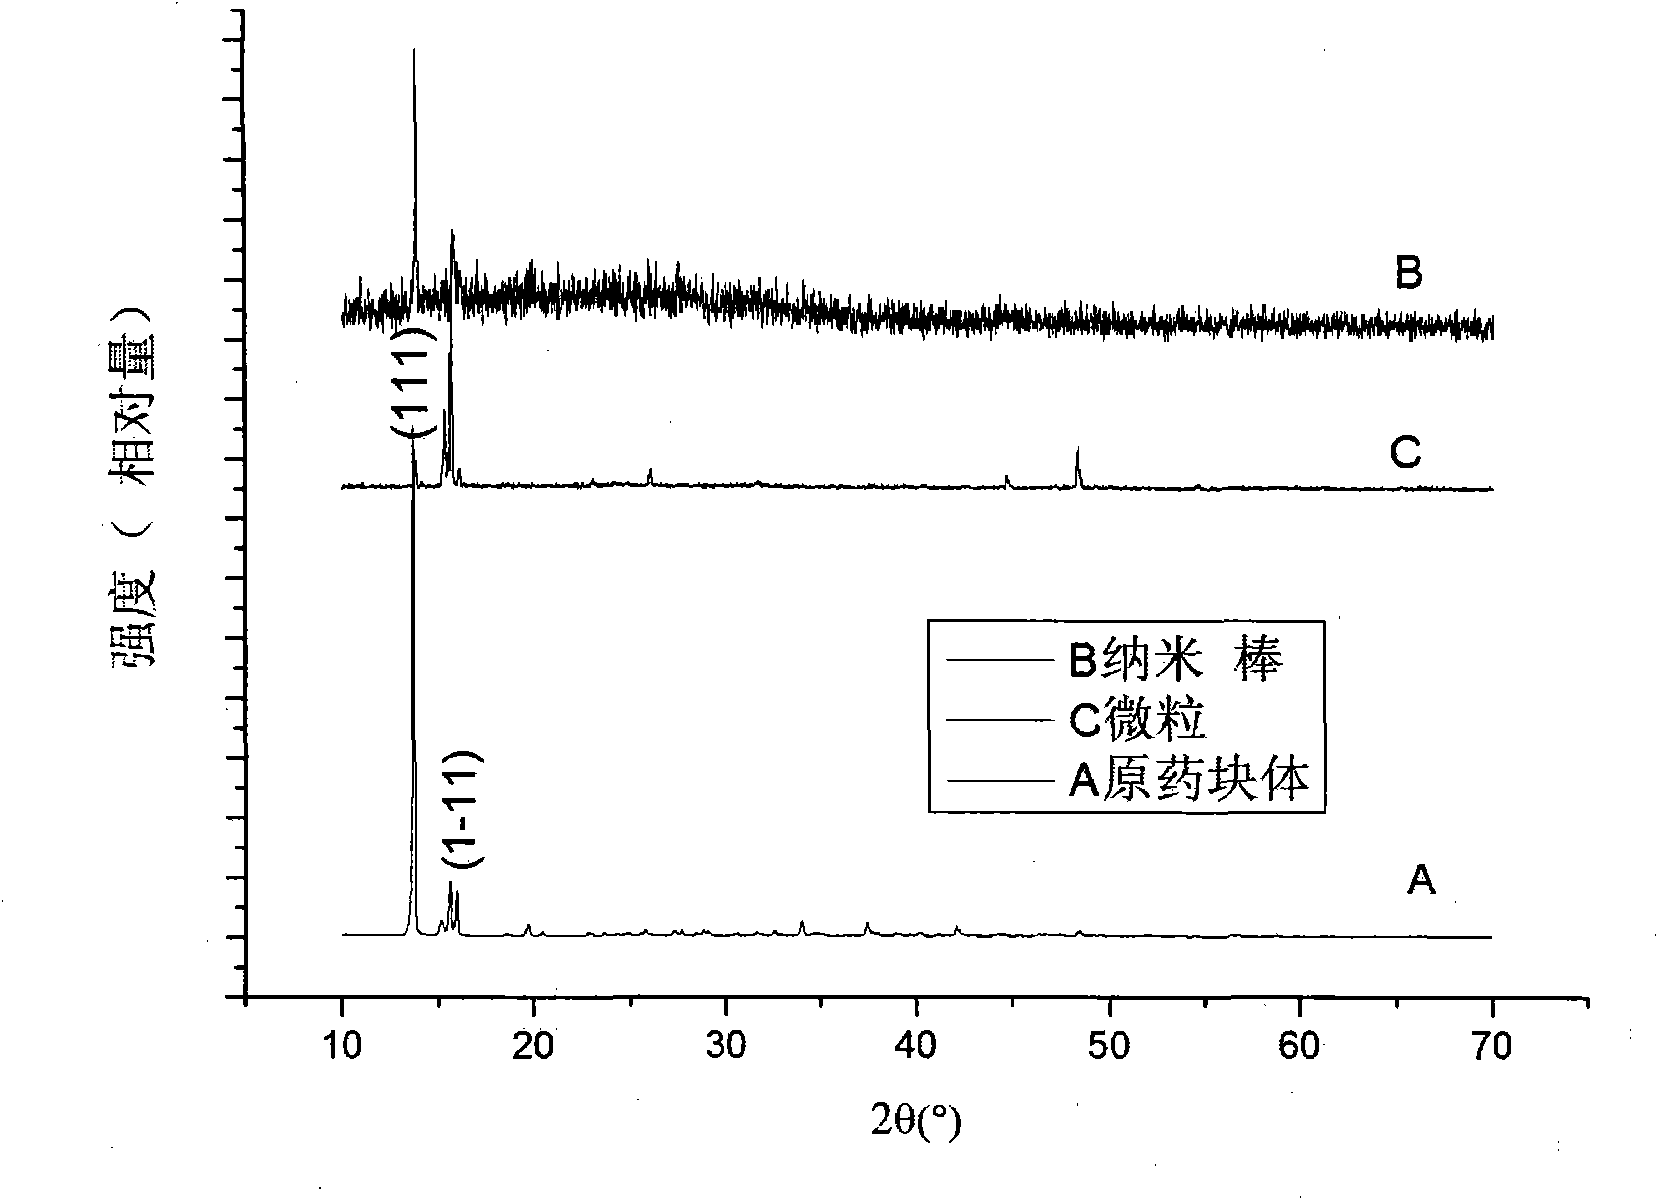 Method for preparing dichloro dicyclopentadienyl titanium and cis-platinum nano-particles by atomization ultrasound polarity difference technology